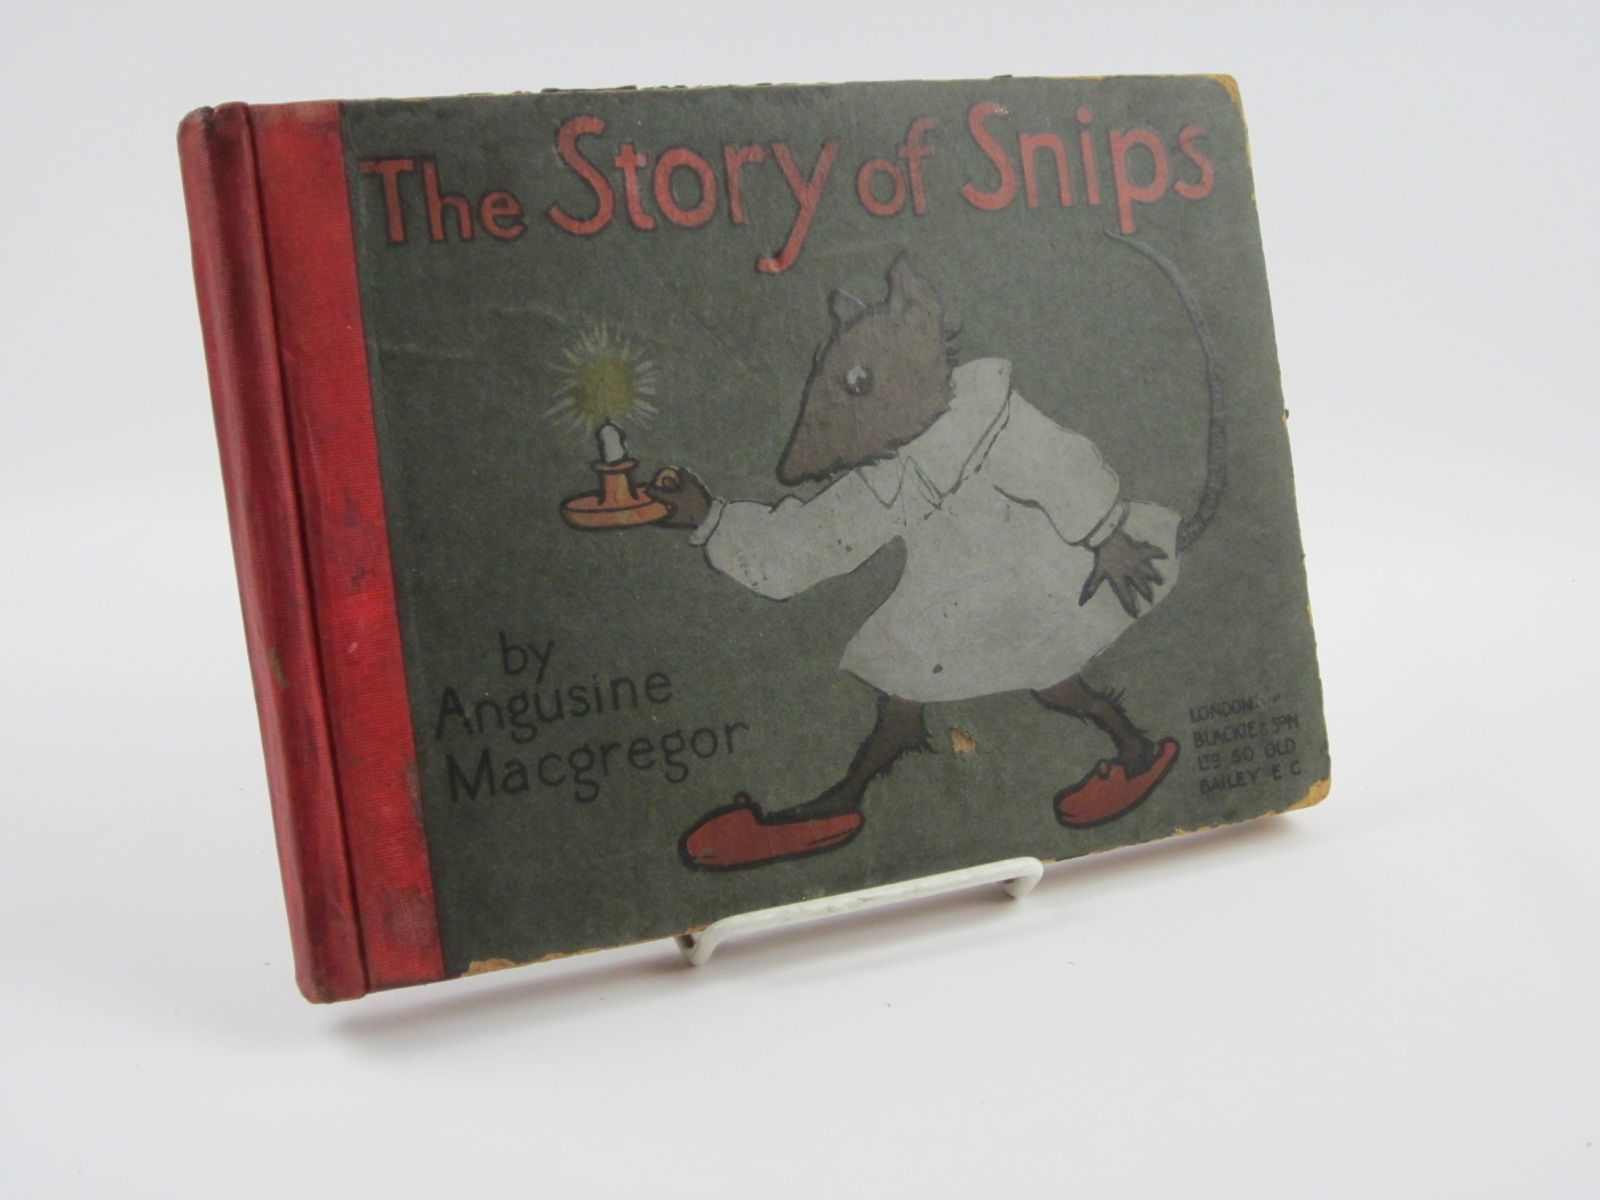 Photo of THE STORY OF SNIPS written by MacGregor, Angusine illustrated by Macgregor, Angusine published by Blackie & Son Ltd. (STOCK CODE: 1309804)  for sale by Stella & Rose's Books